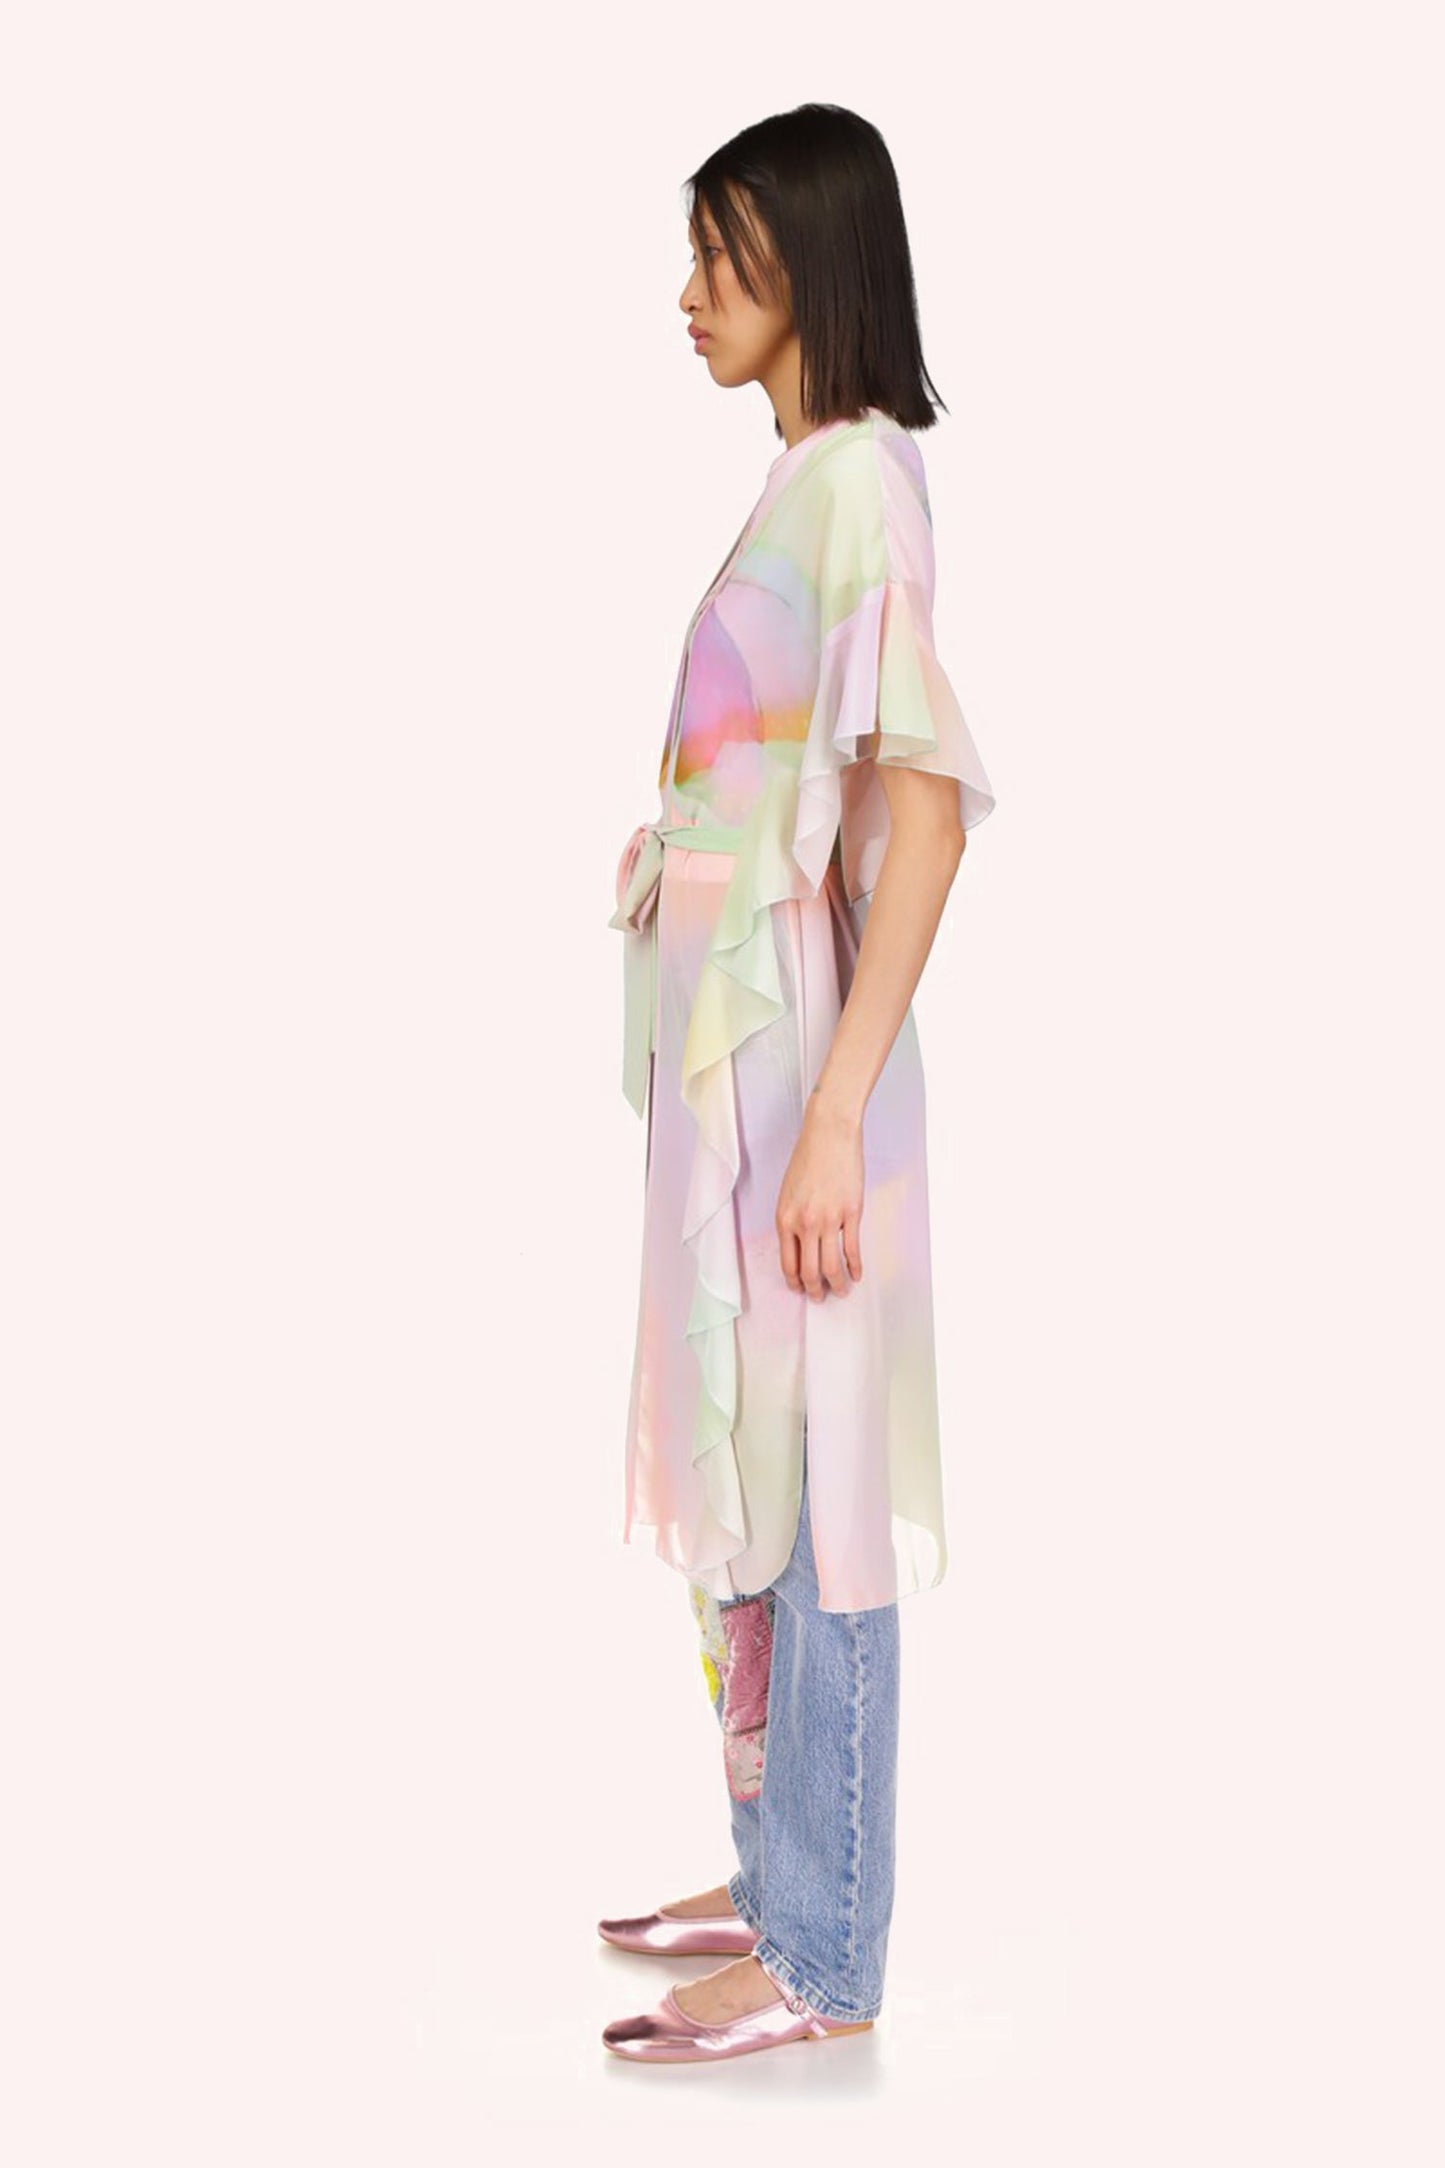 This creates a sense of effortless elegance and makes the kaftan perfect to be on top of jeans